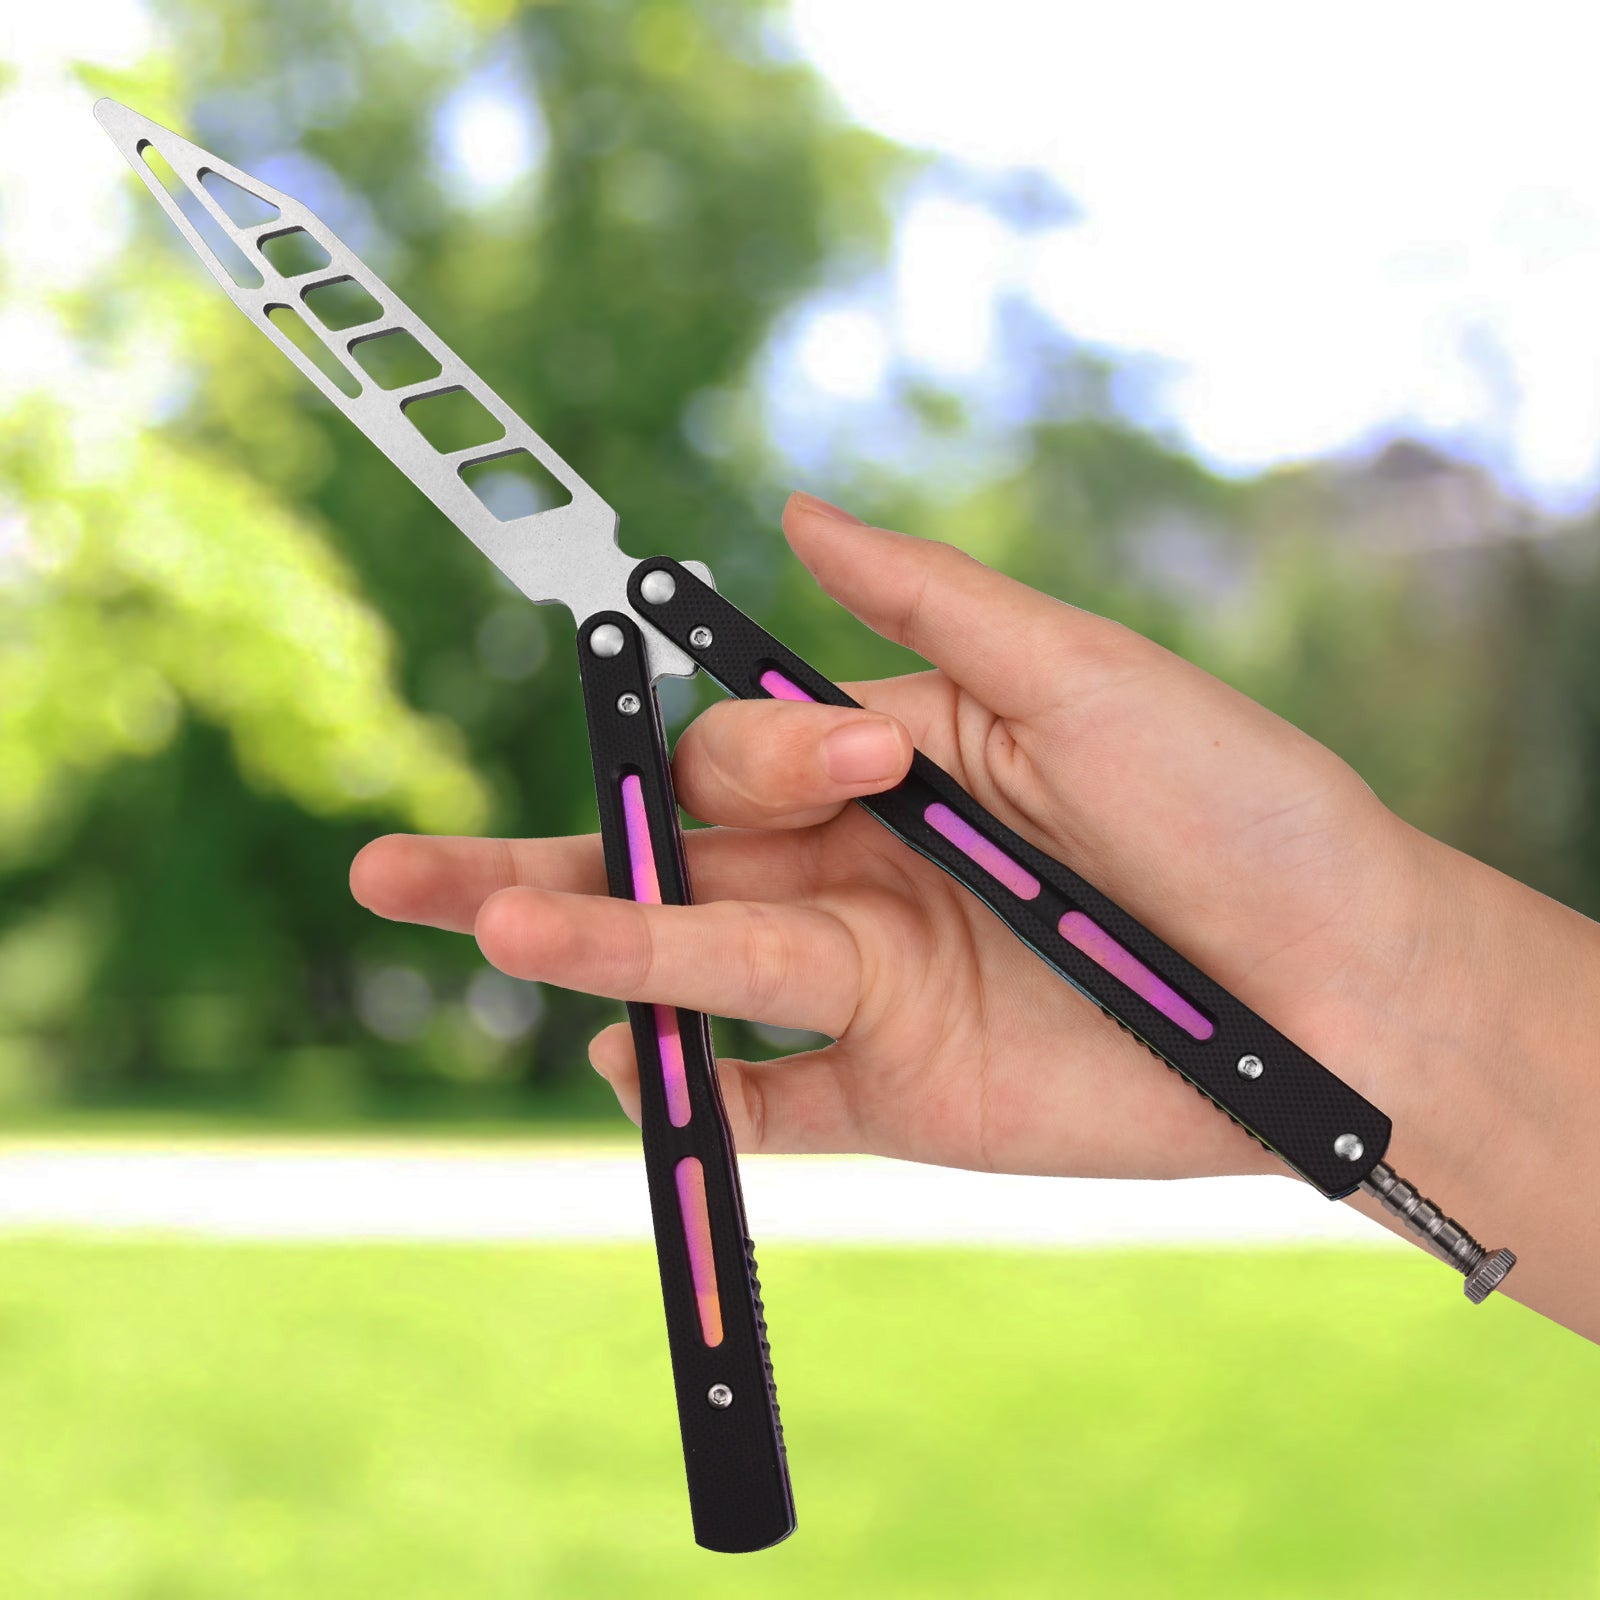 NedFoss Butterfly Knife Trainer with G10 Handle, Practice Balisong Runs on Bearings, Pink